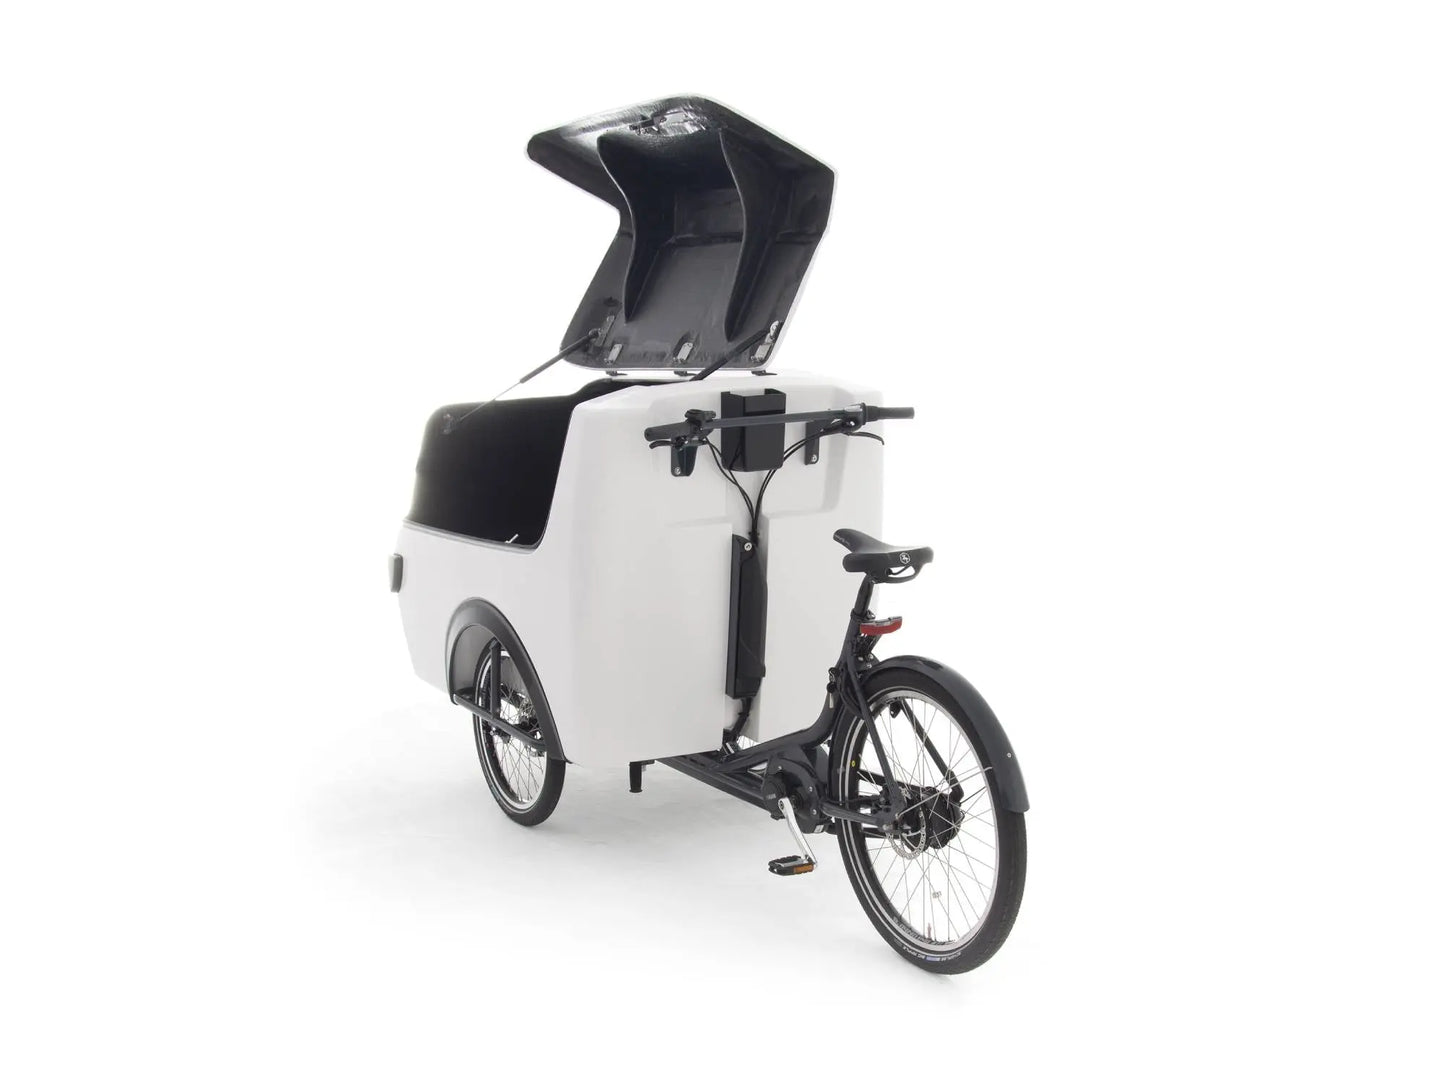 RALEIGH PRO ELECTRIC CARGO TRIKE